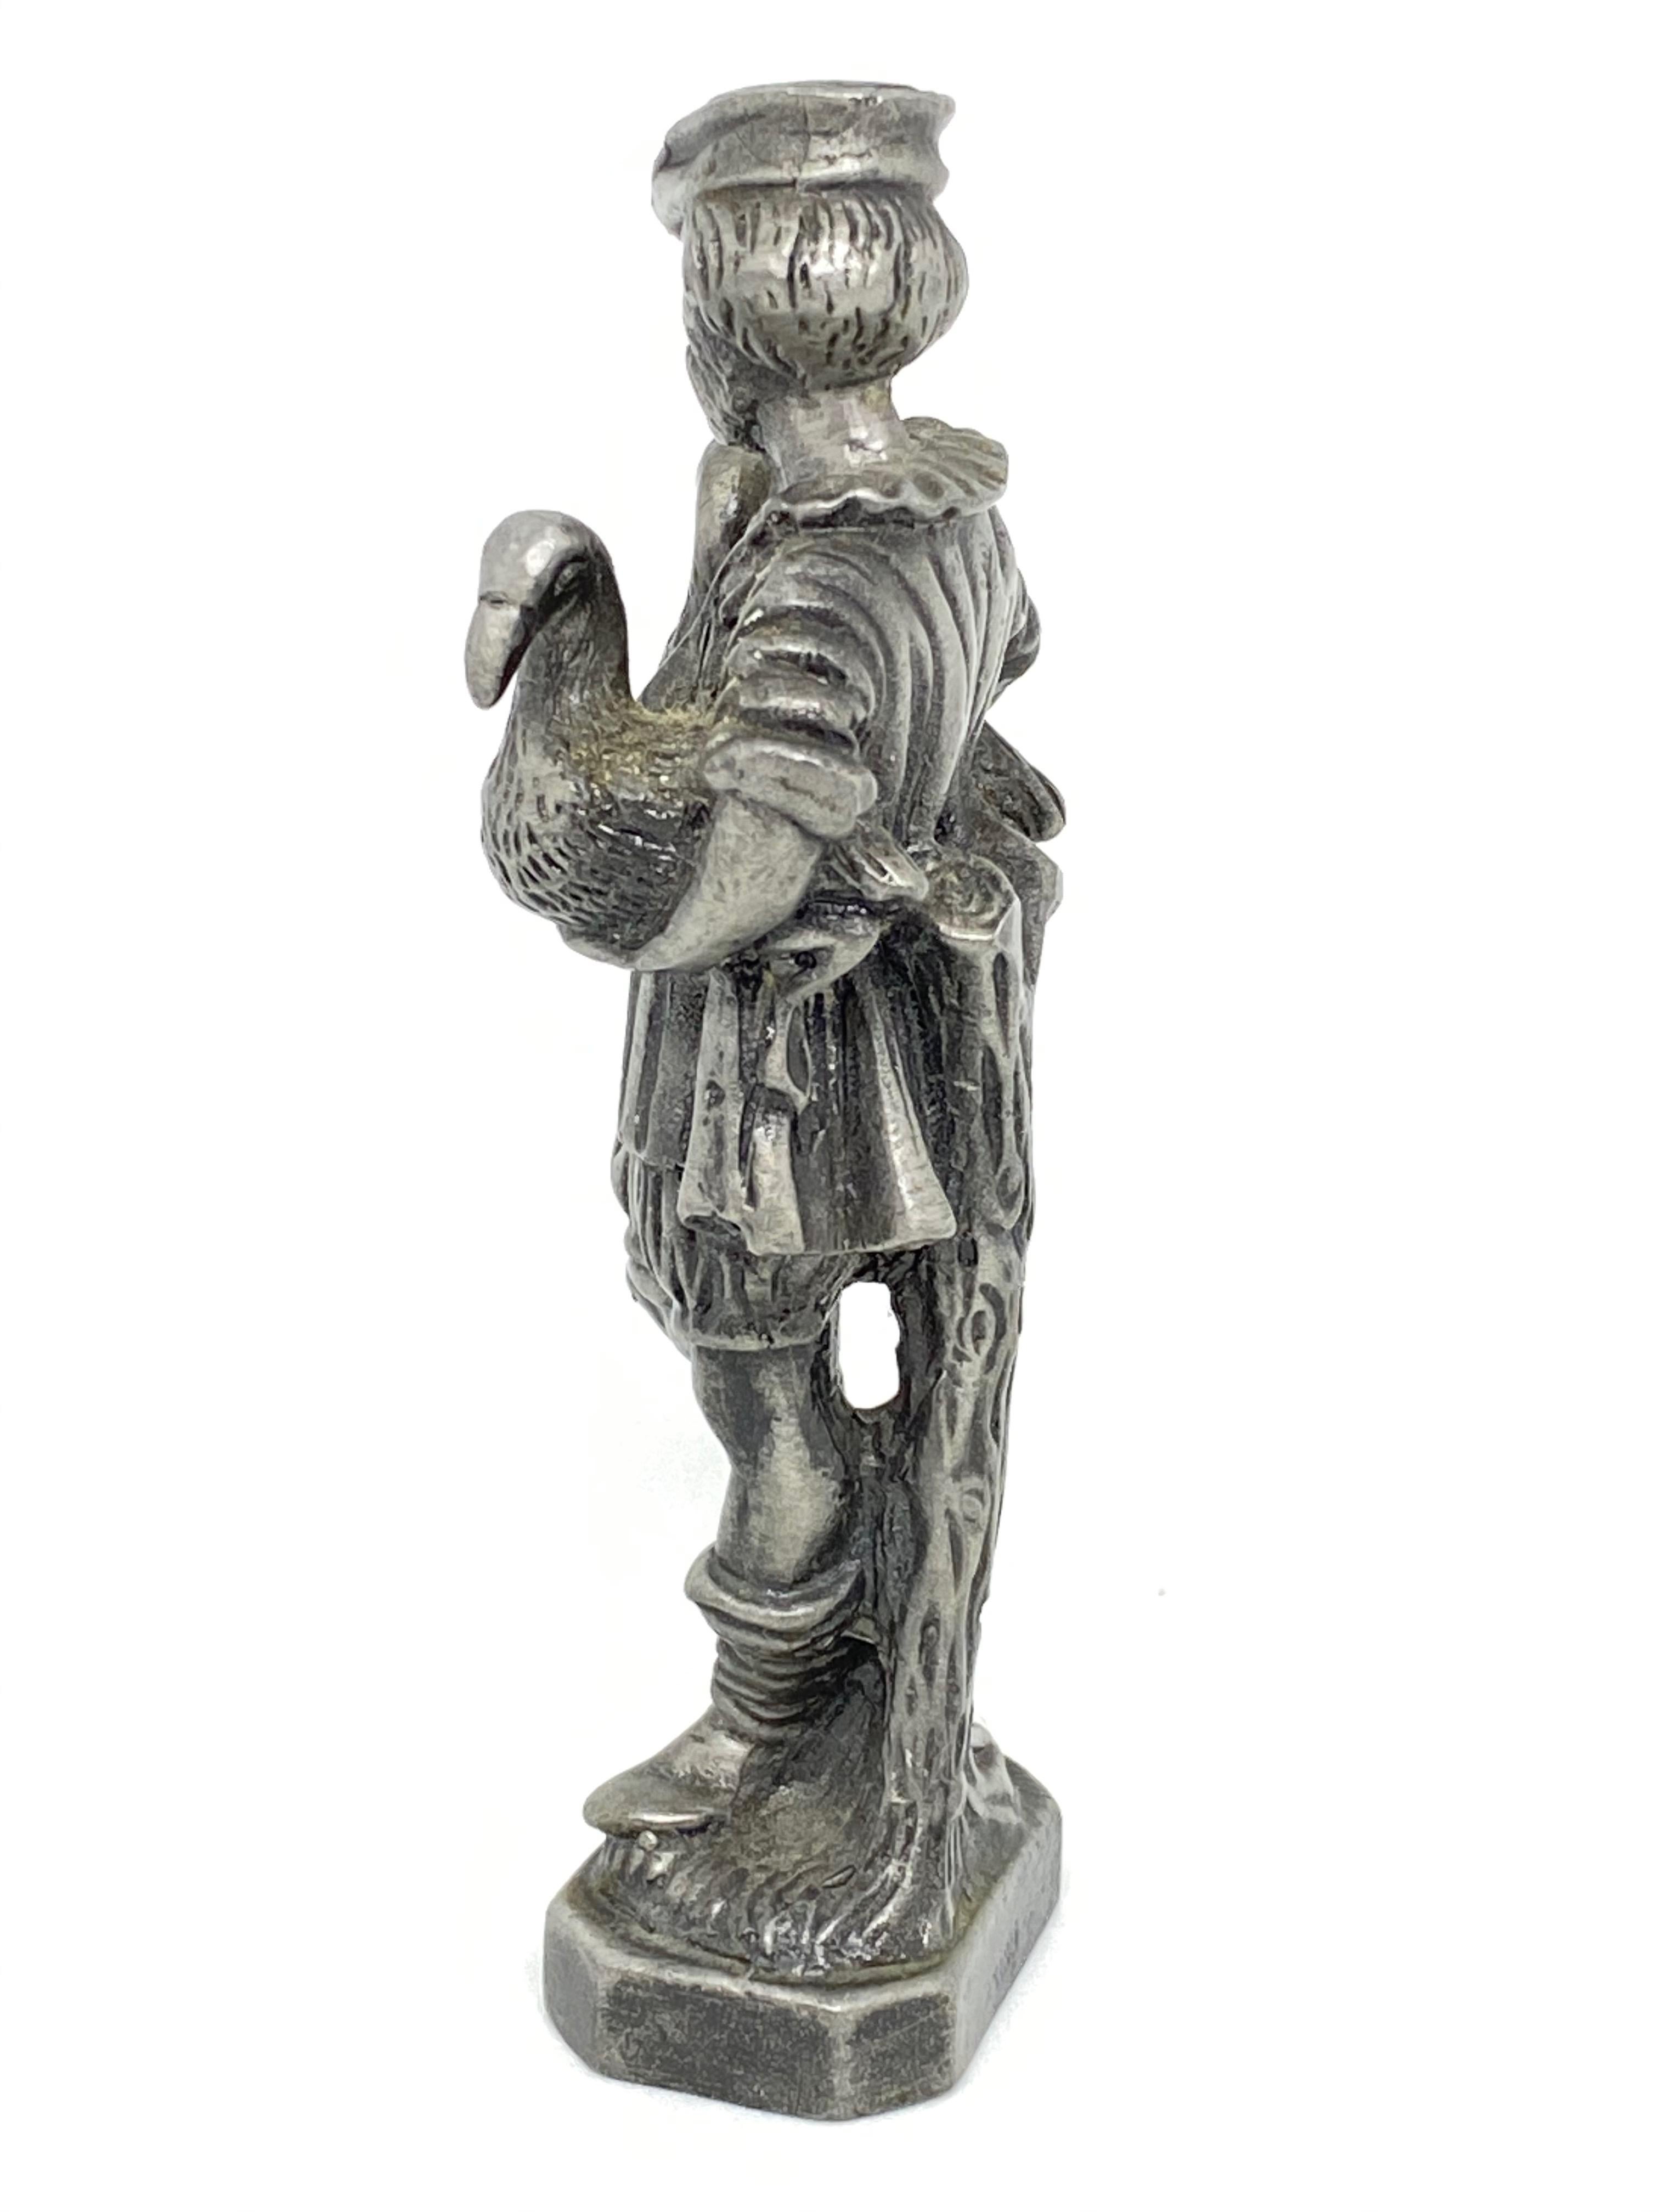 A beautiful pewter figurine of the goose man, a statue in the middle of a water fountain in Nuremberg, Germany. Some wear with a nice patina, but this is old-age. Made of metal. A beautiful nice item to display in your collection. Last picture is